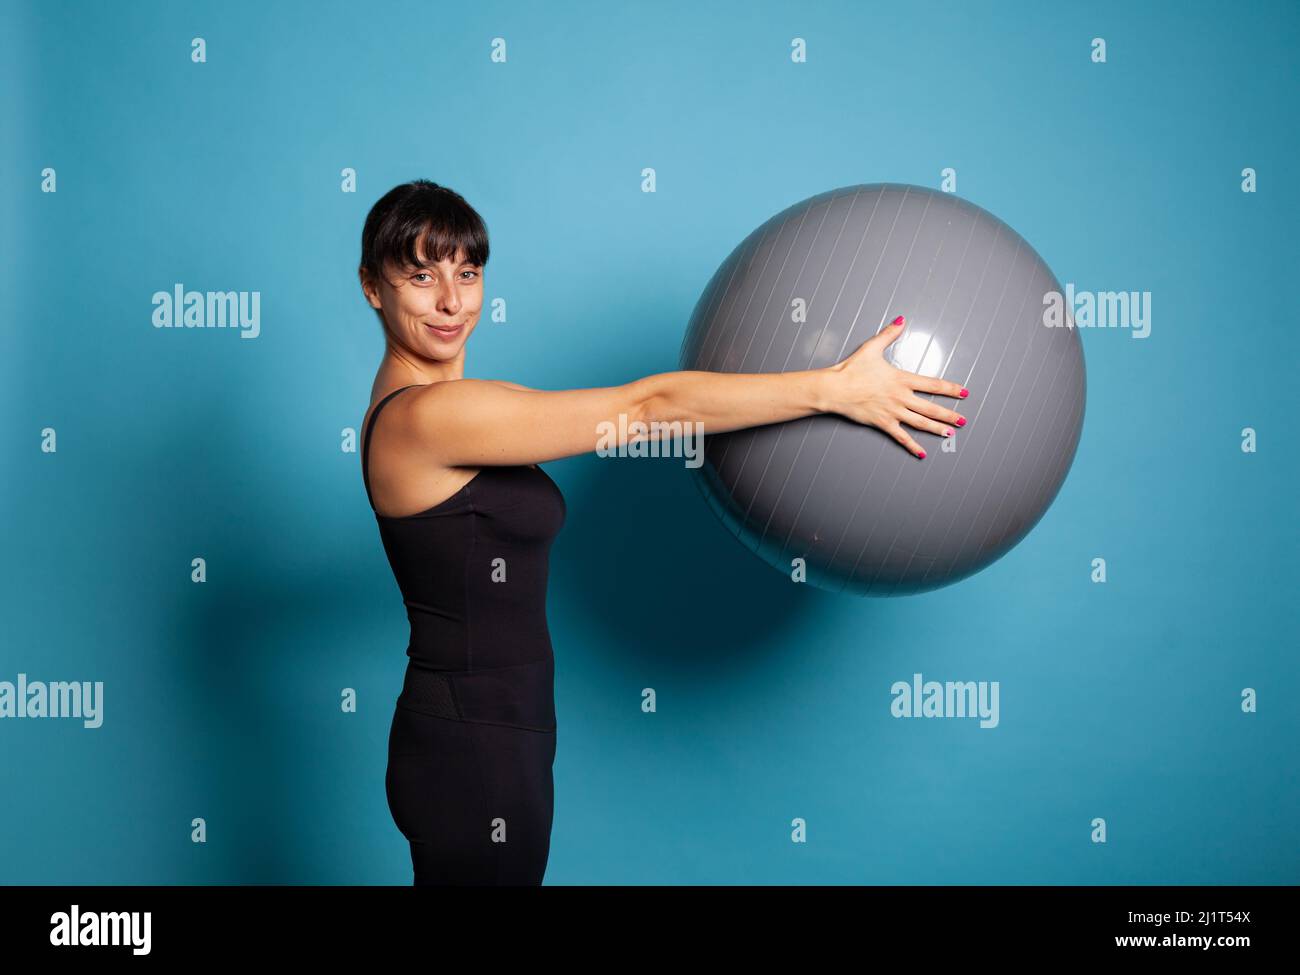 Classic Pilates with Props. Athletic Woman Practice Shoulder Bridge with a  Small Fit Ball Under Her Feet, Isolated on Stock Image - Image of body,  activity: 239190333